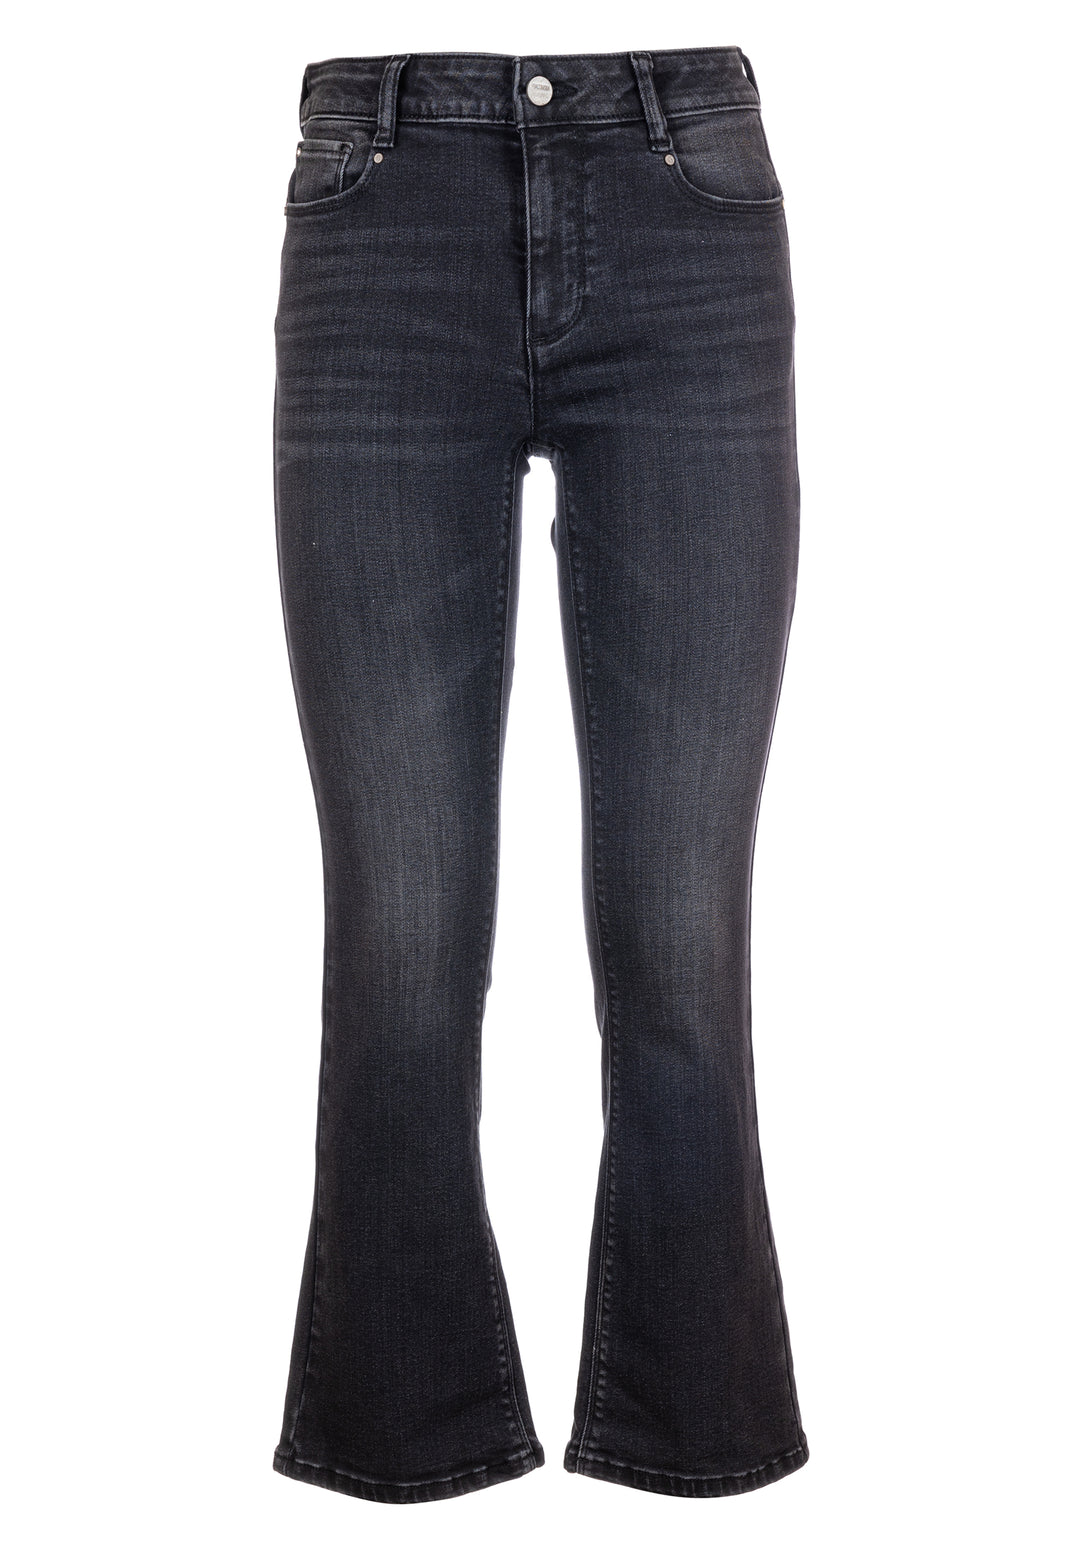 Jeans cropped flare with push up effect made in black denim with middle wash Fracomina FP23WV8030D40801-053-1